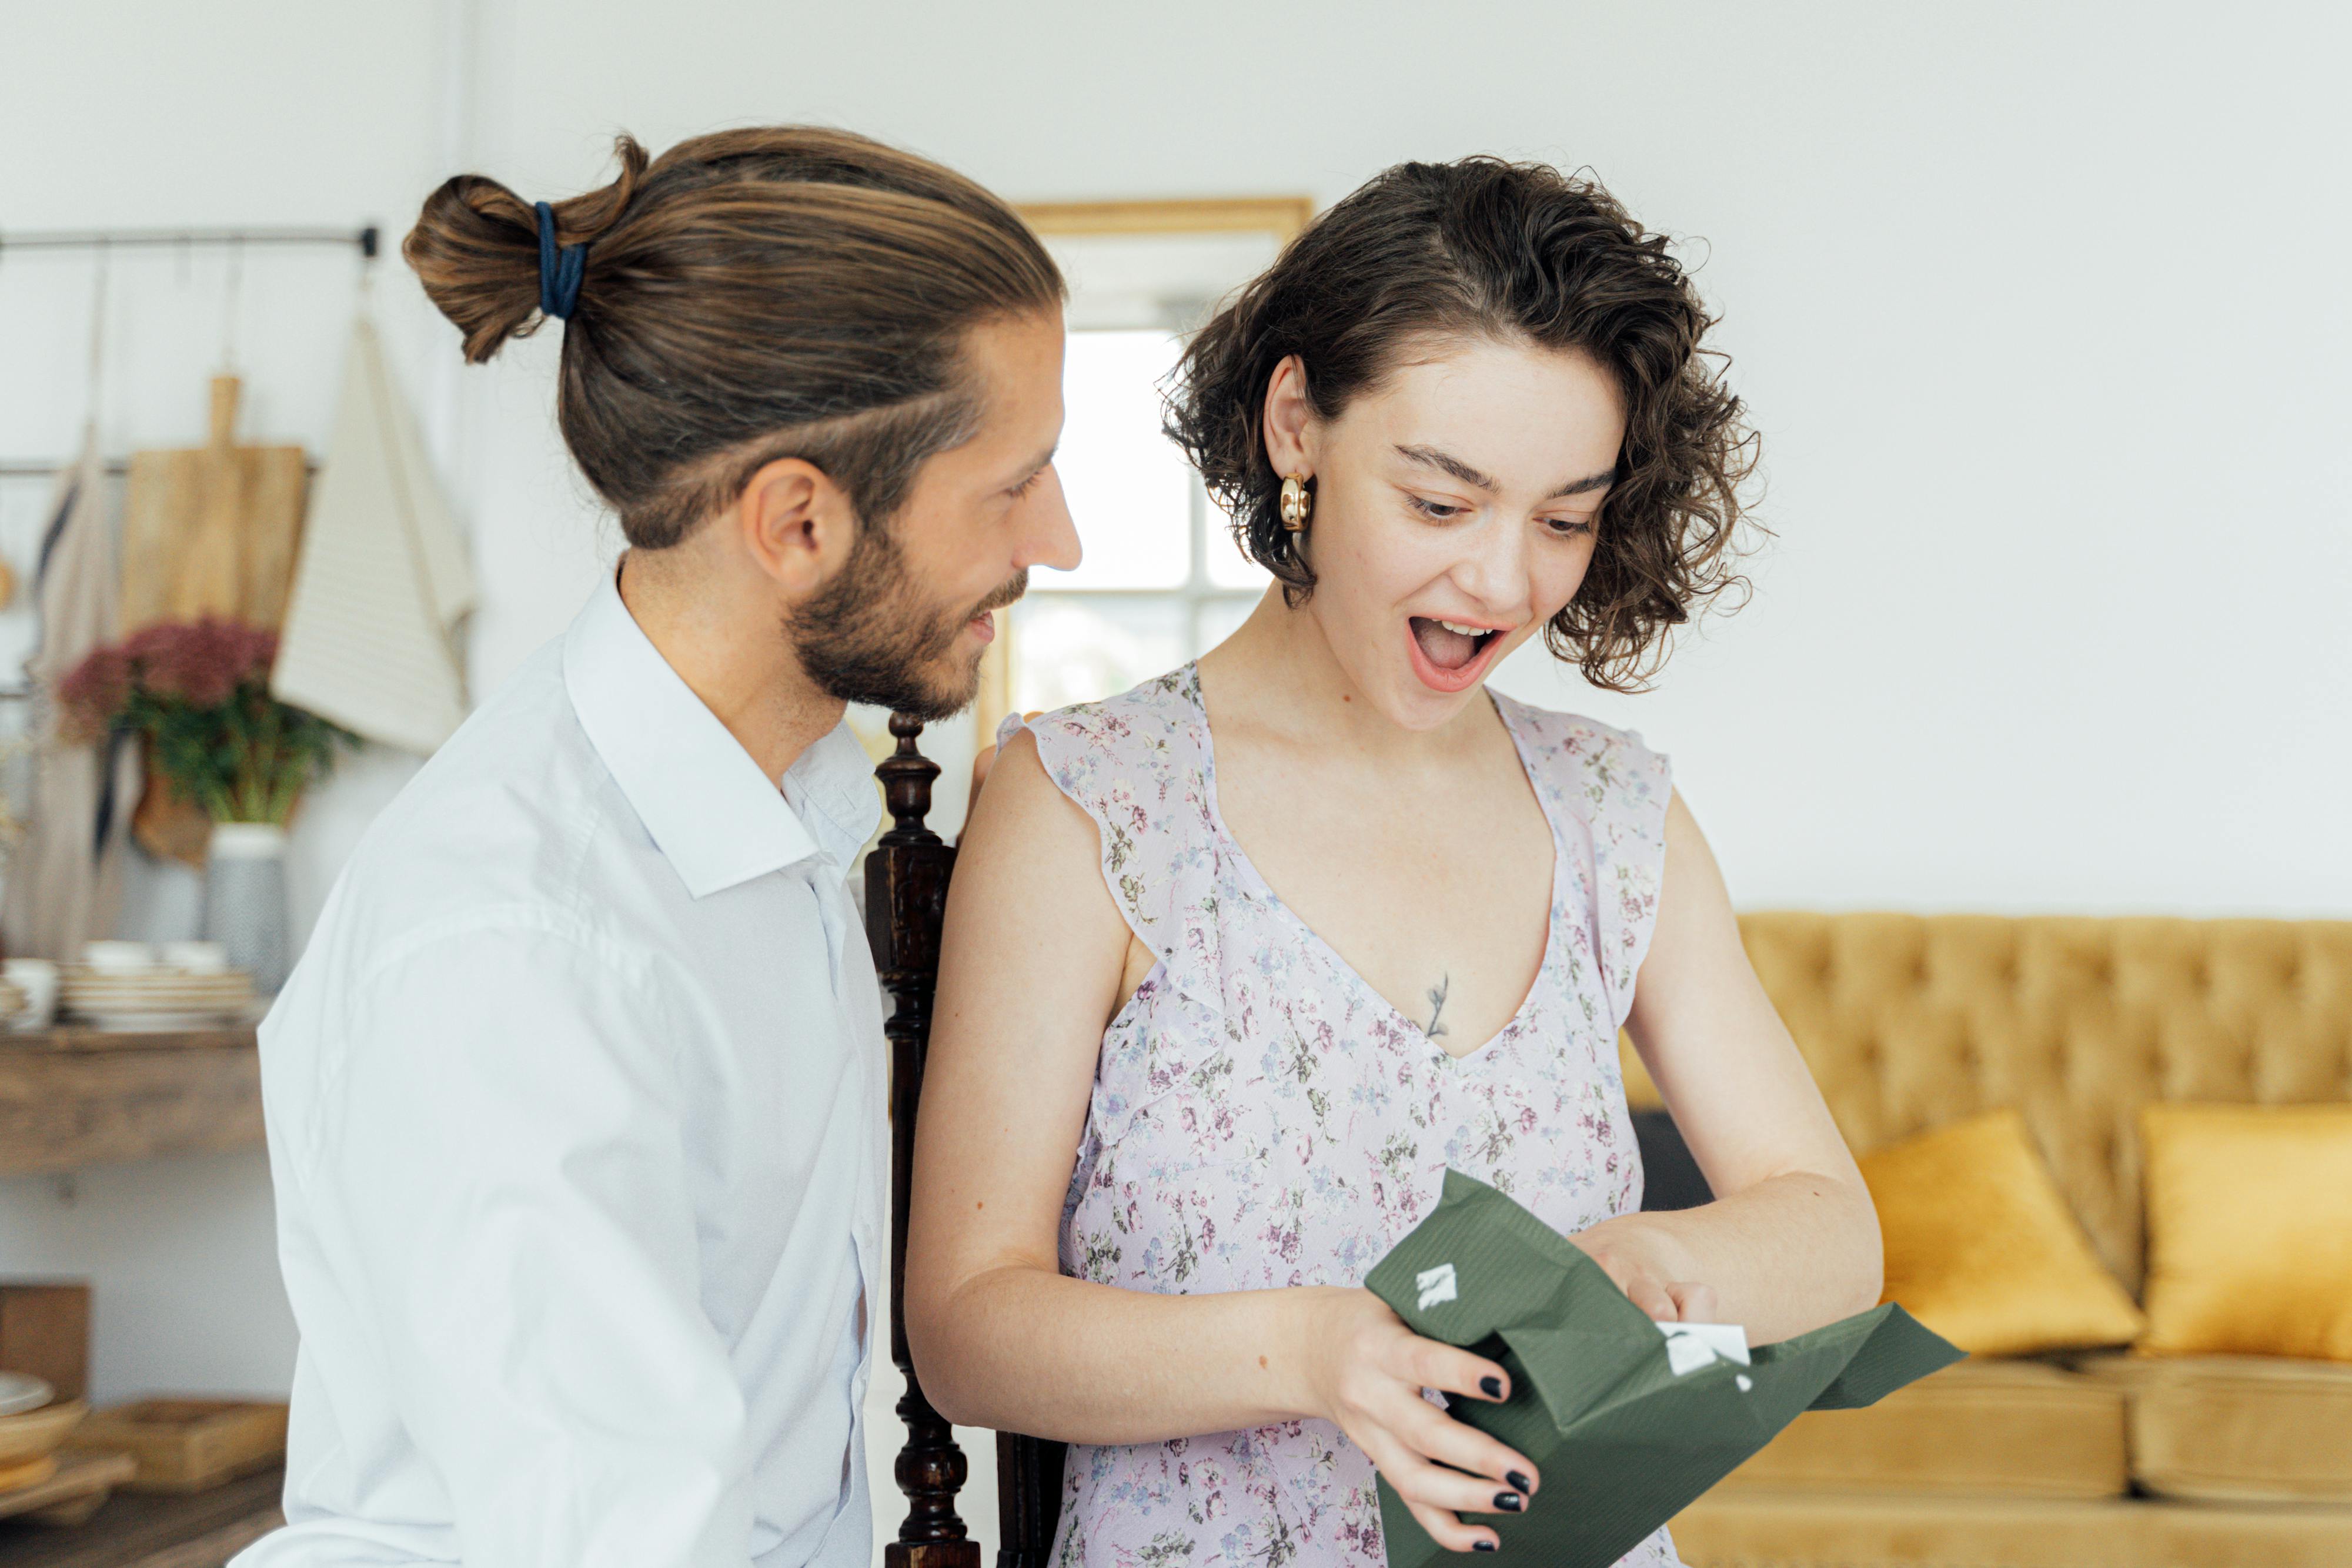 A woman reacting surprised to a gift from a man | Source: Pexels